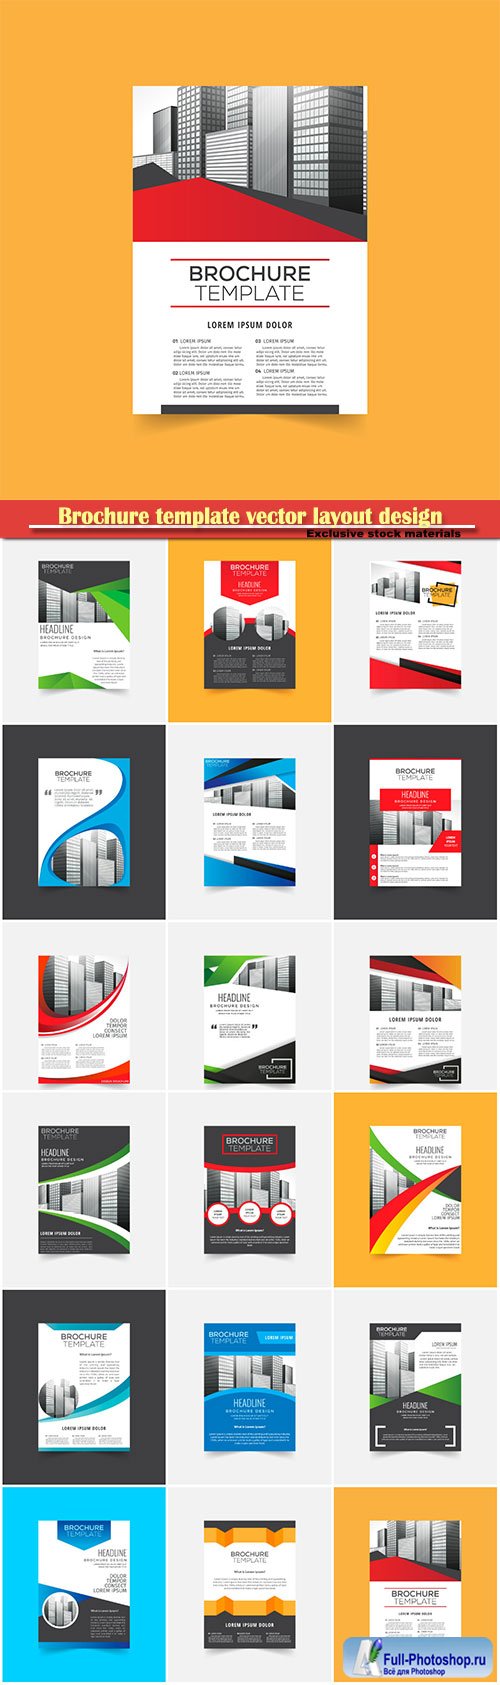 Brochure template vector layout design, corporate business annual report, magazine, flyer mockup # 110